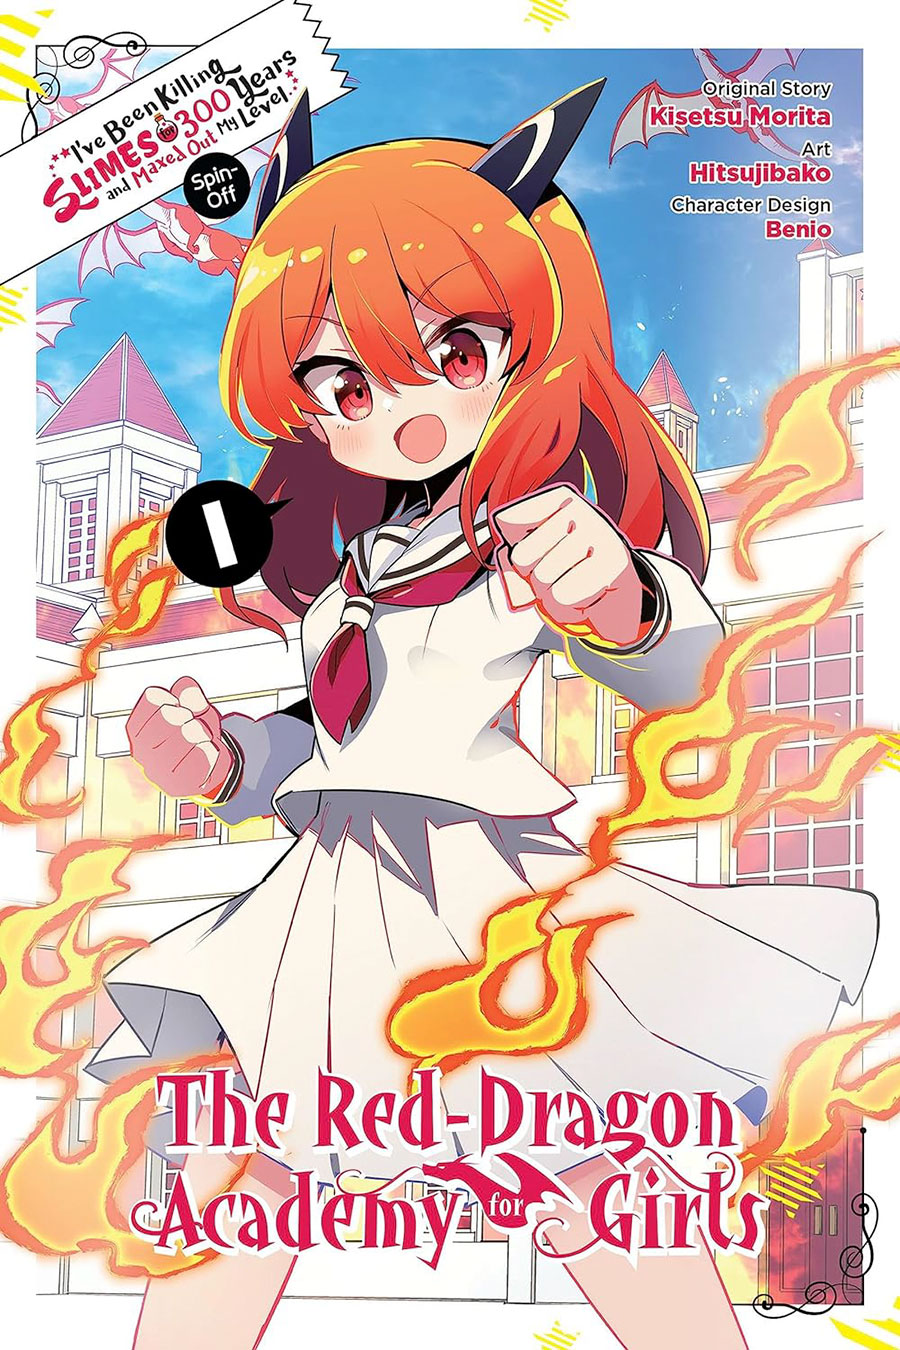 Ive Been Killing Slimes For 300 Years And Maxed Out My Level Spin-Off Red Dragon Academy For Girls Vol 1 GN